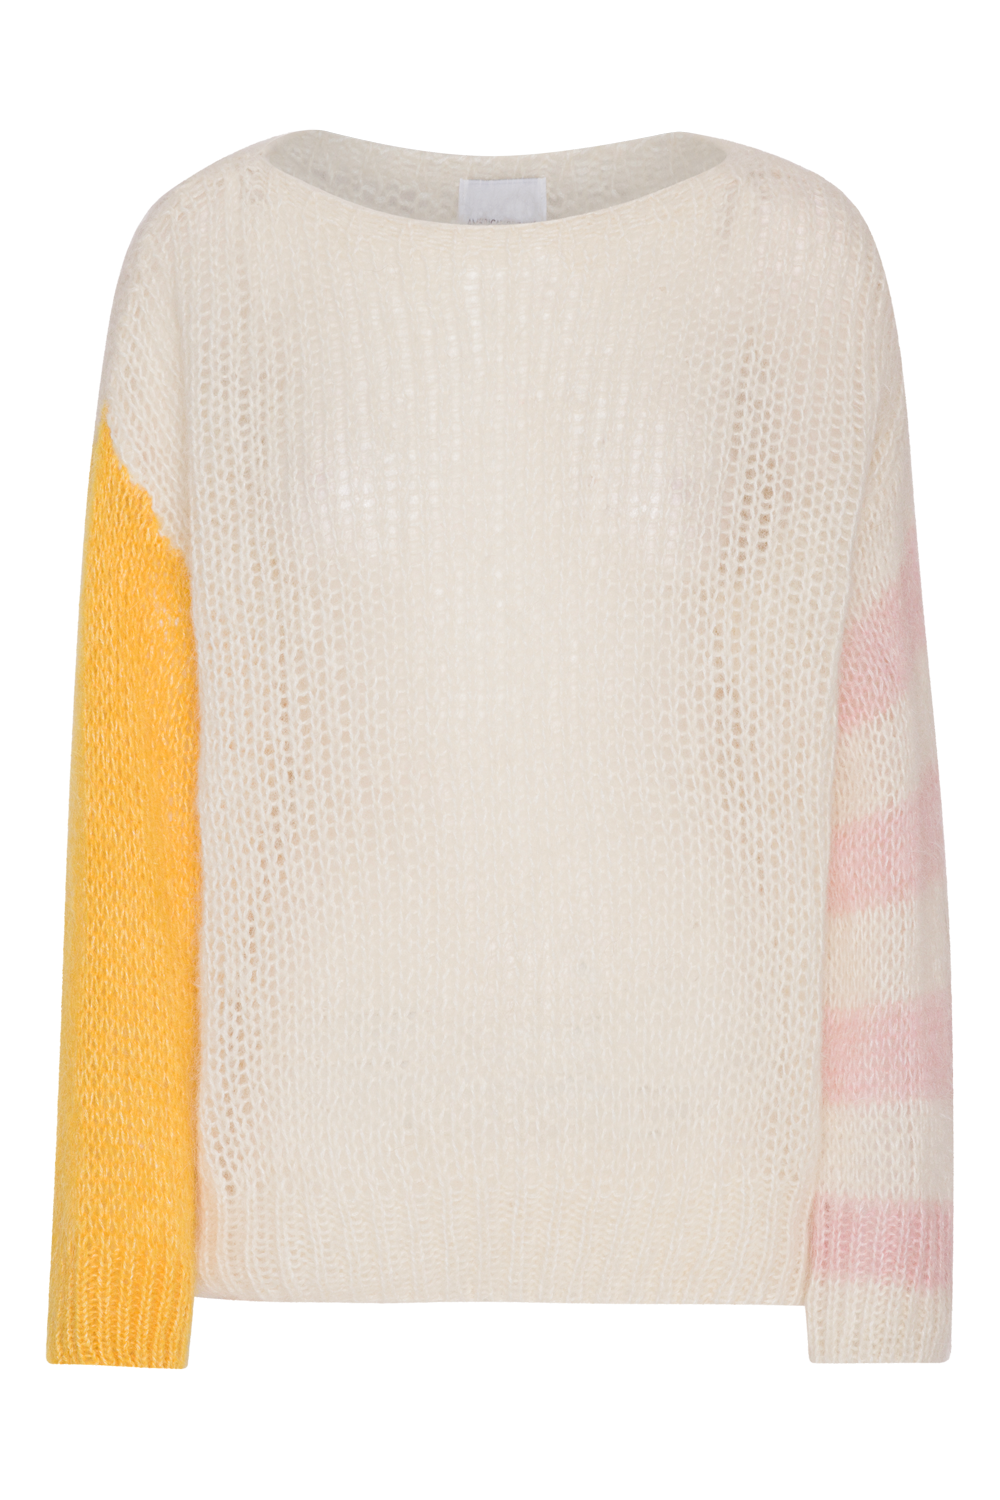 Amira Knit Pullover White Yellow Light Pink Striped